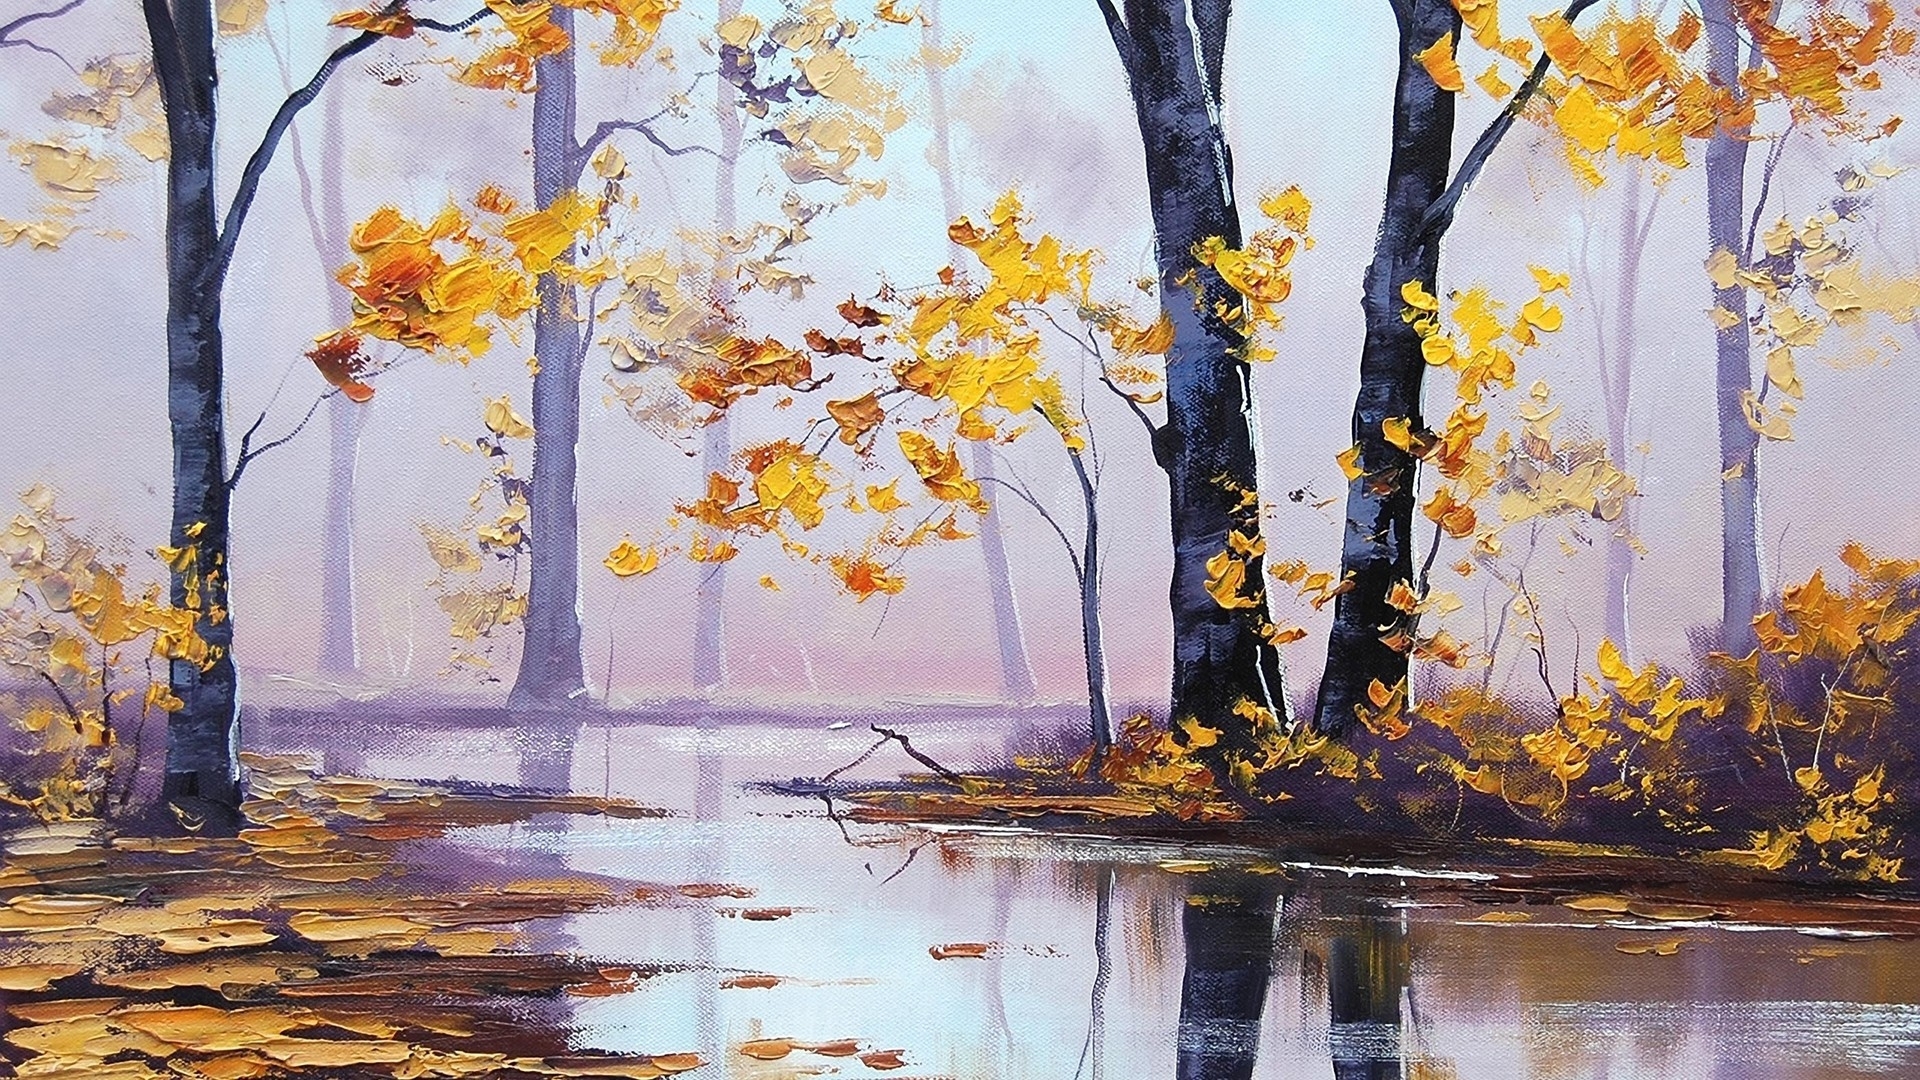 Autumn Scenery Oil Painting Desktop Pc And Mac Wallpaper